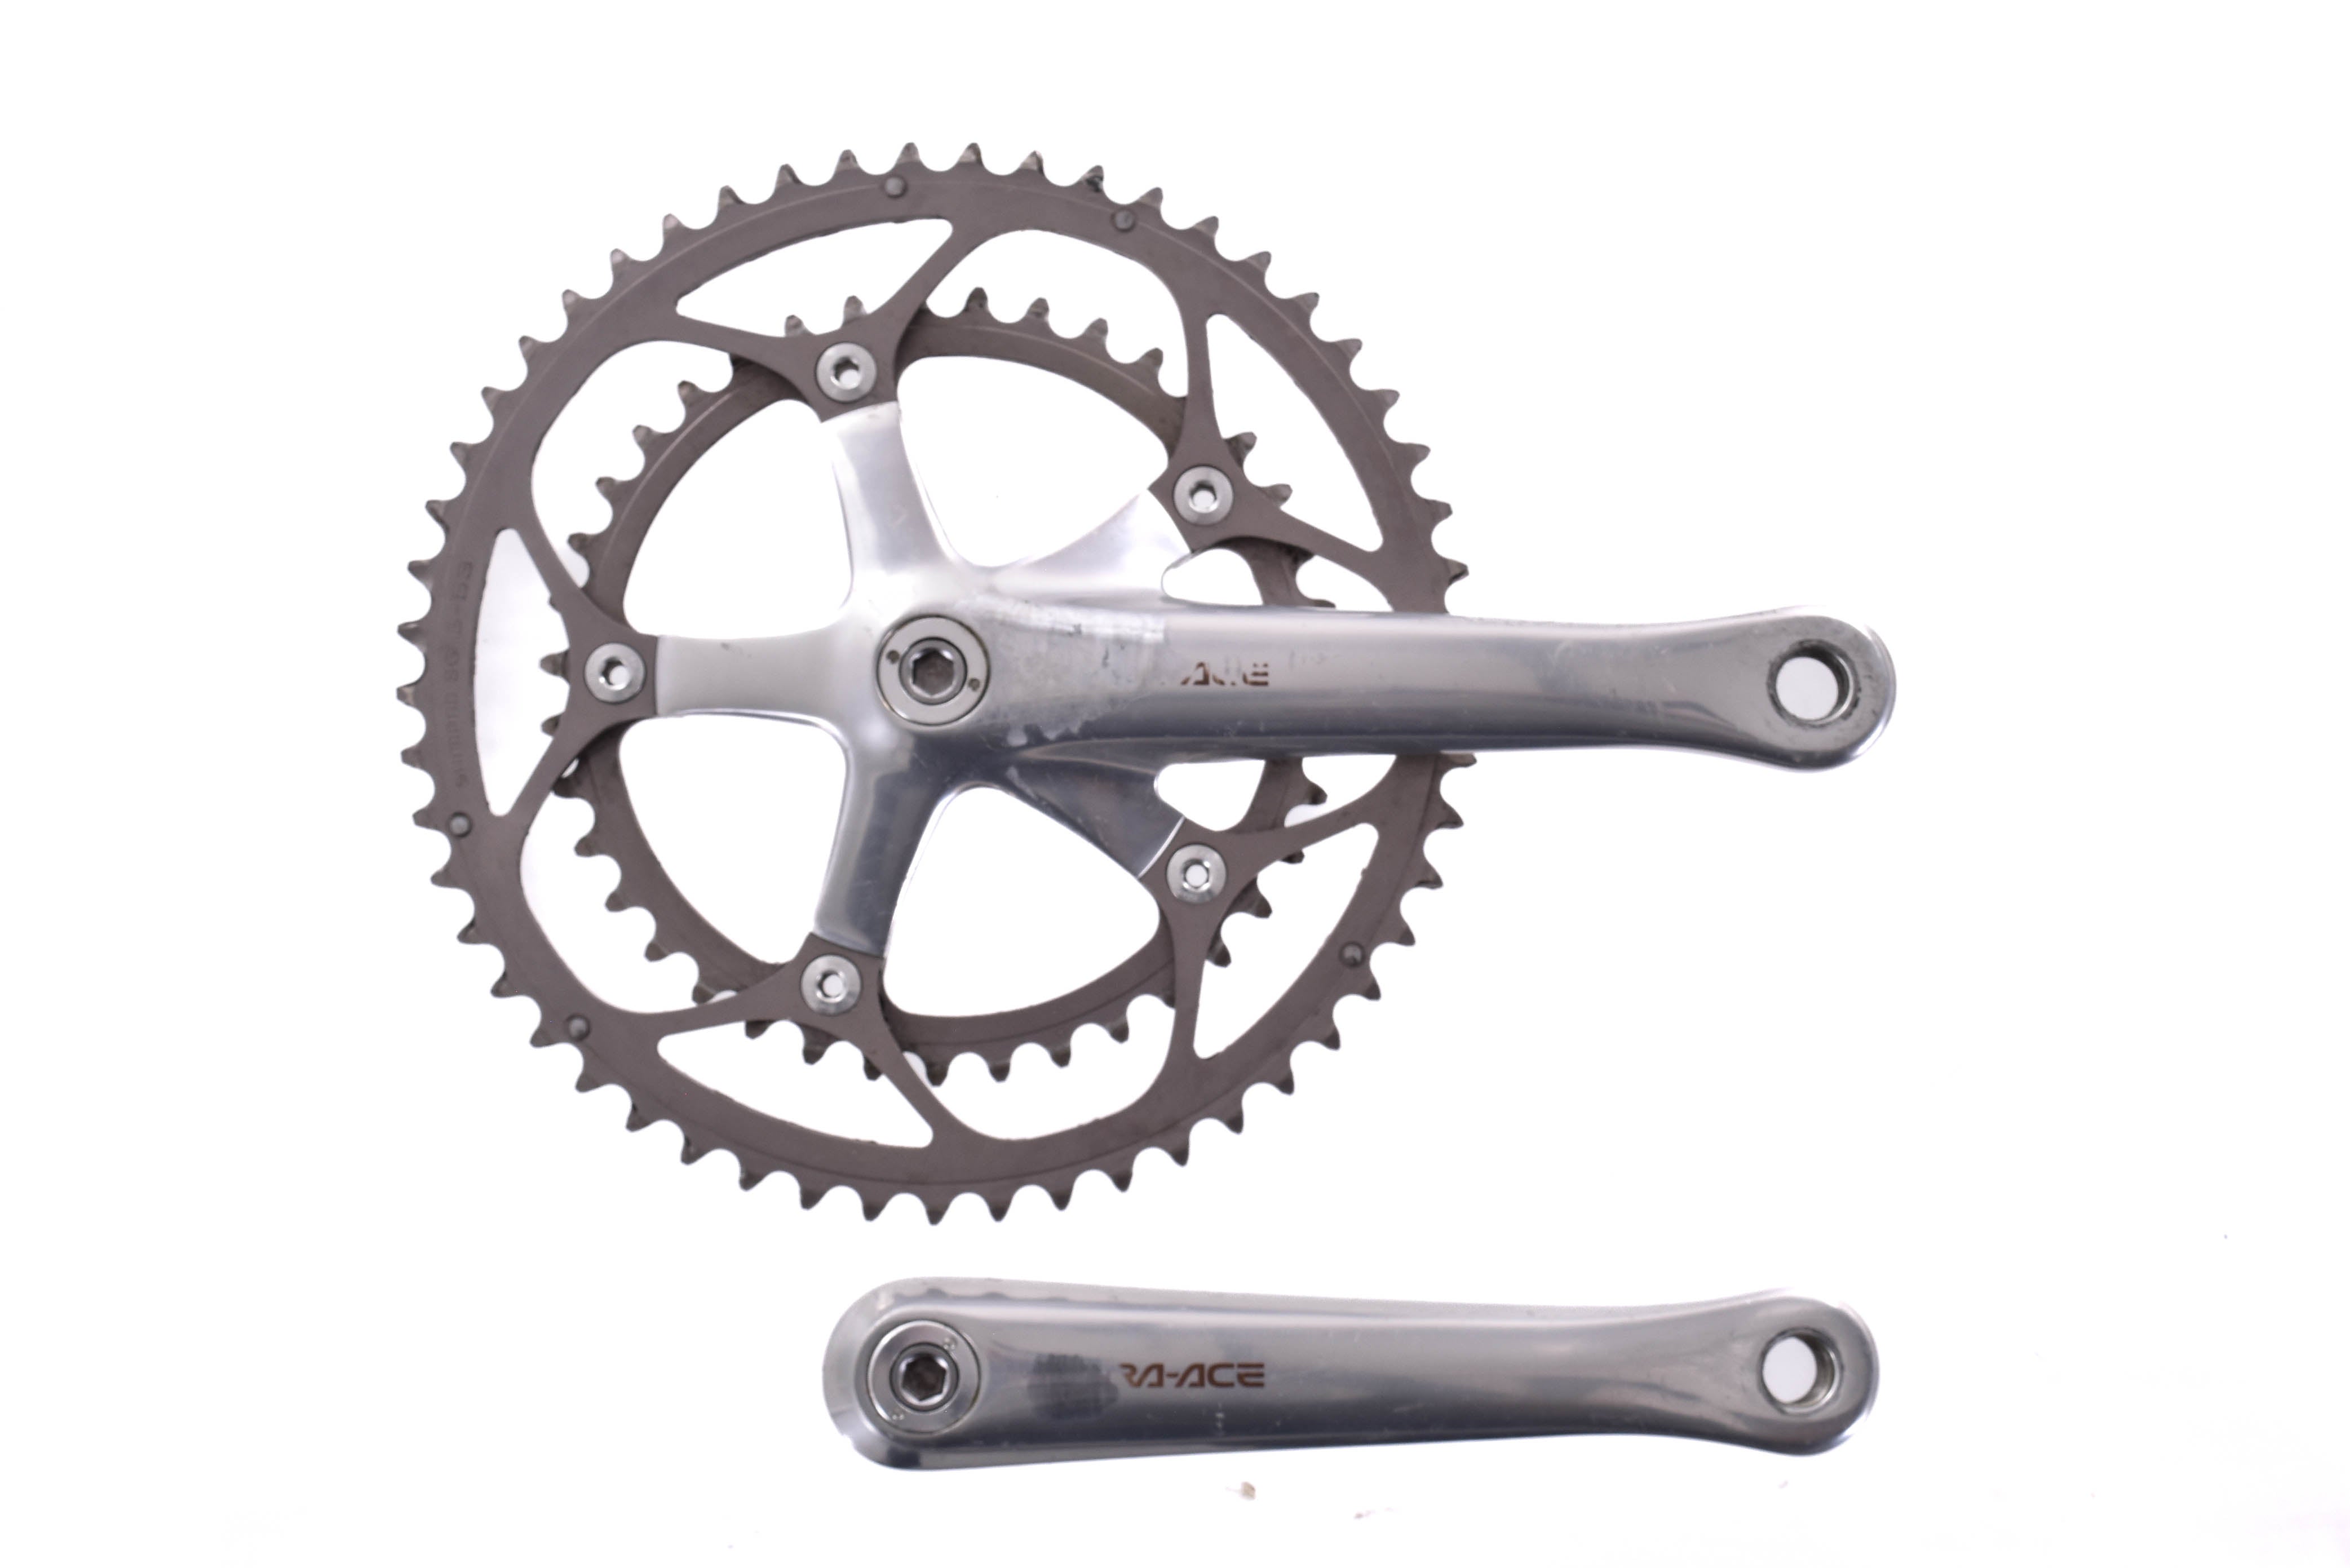 USED Shimano Dura-Ace FC-7700 172.5mm 53/39T Road Crankset Silver